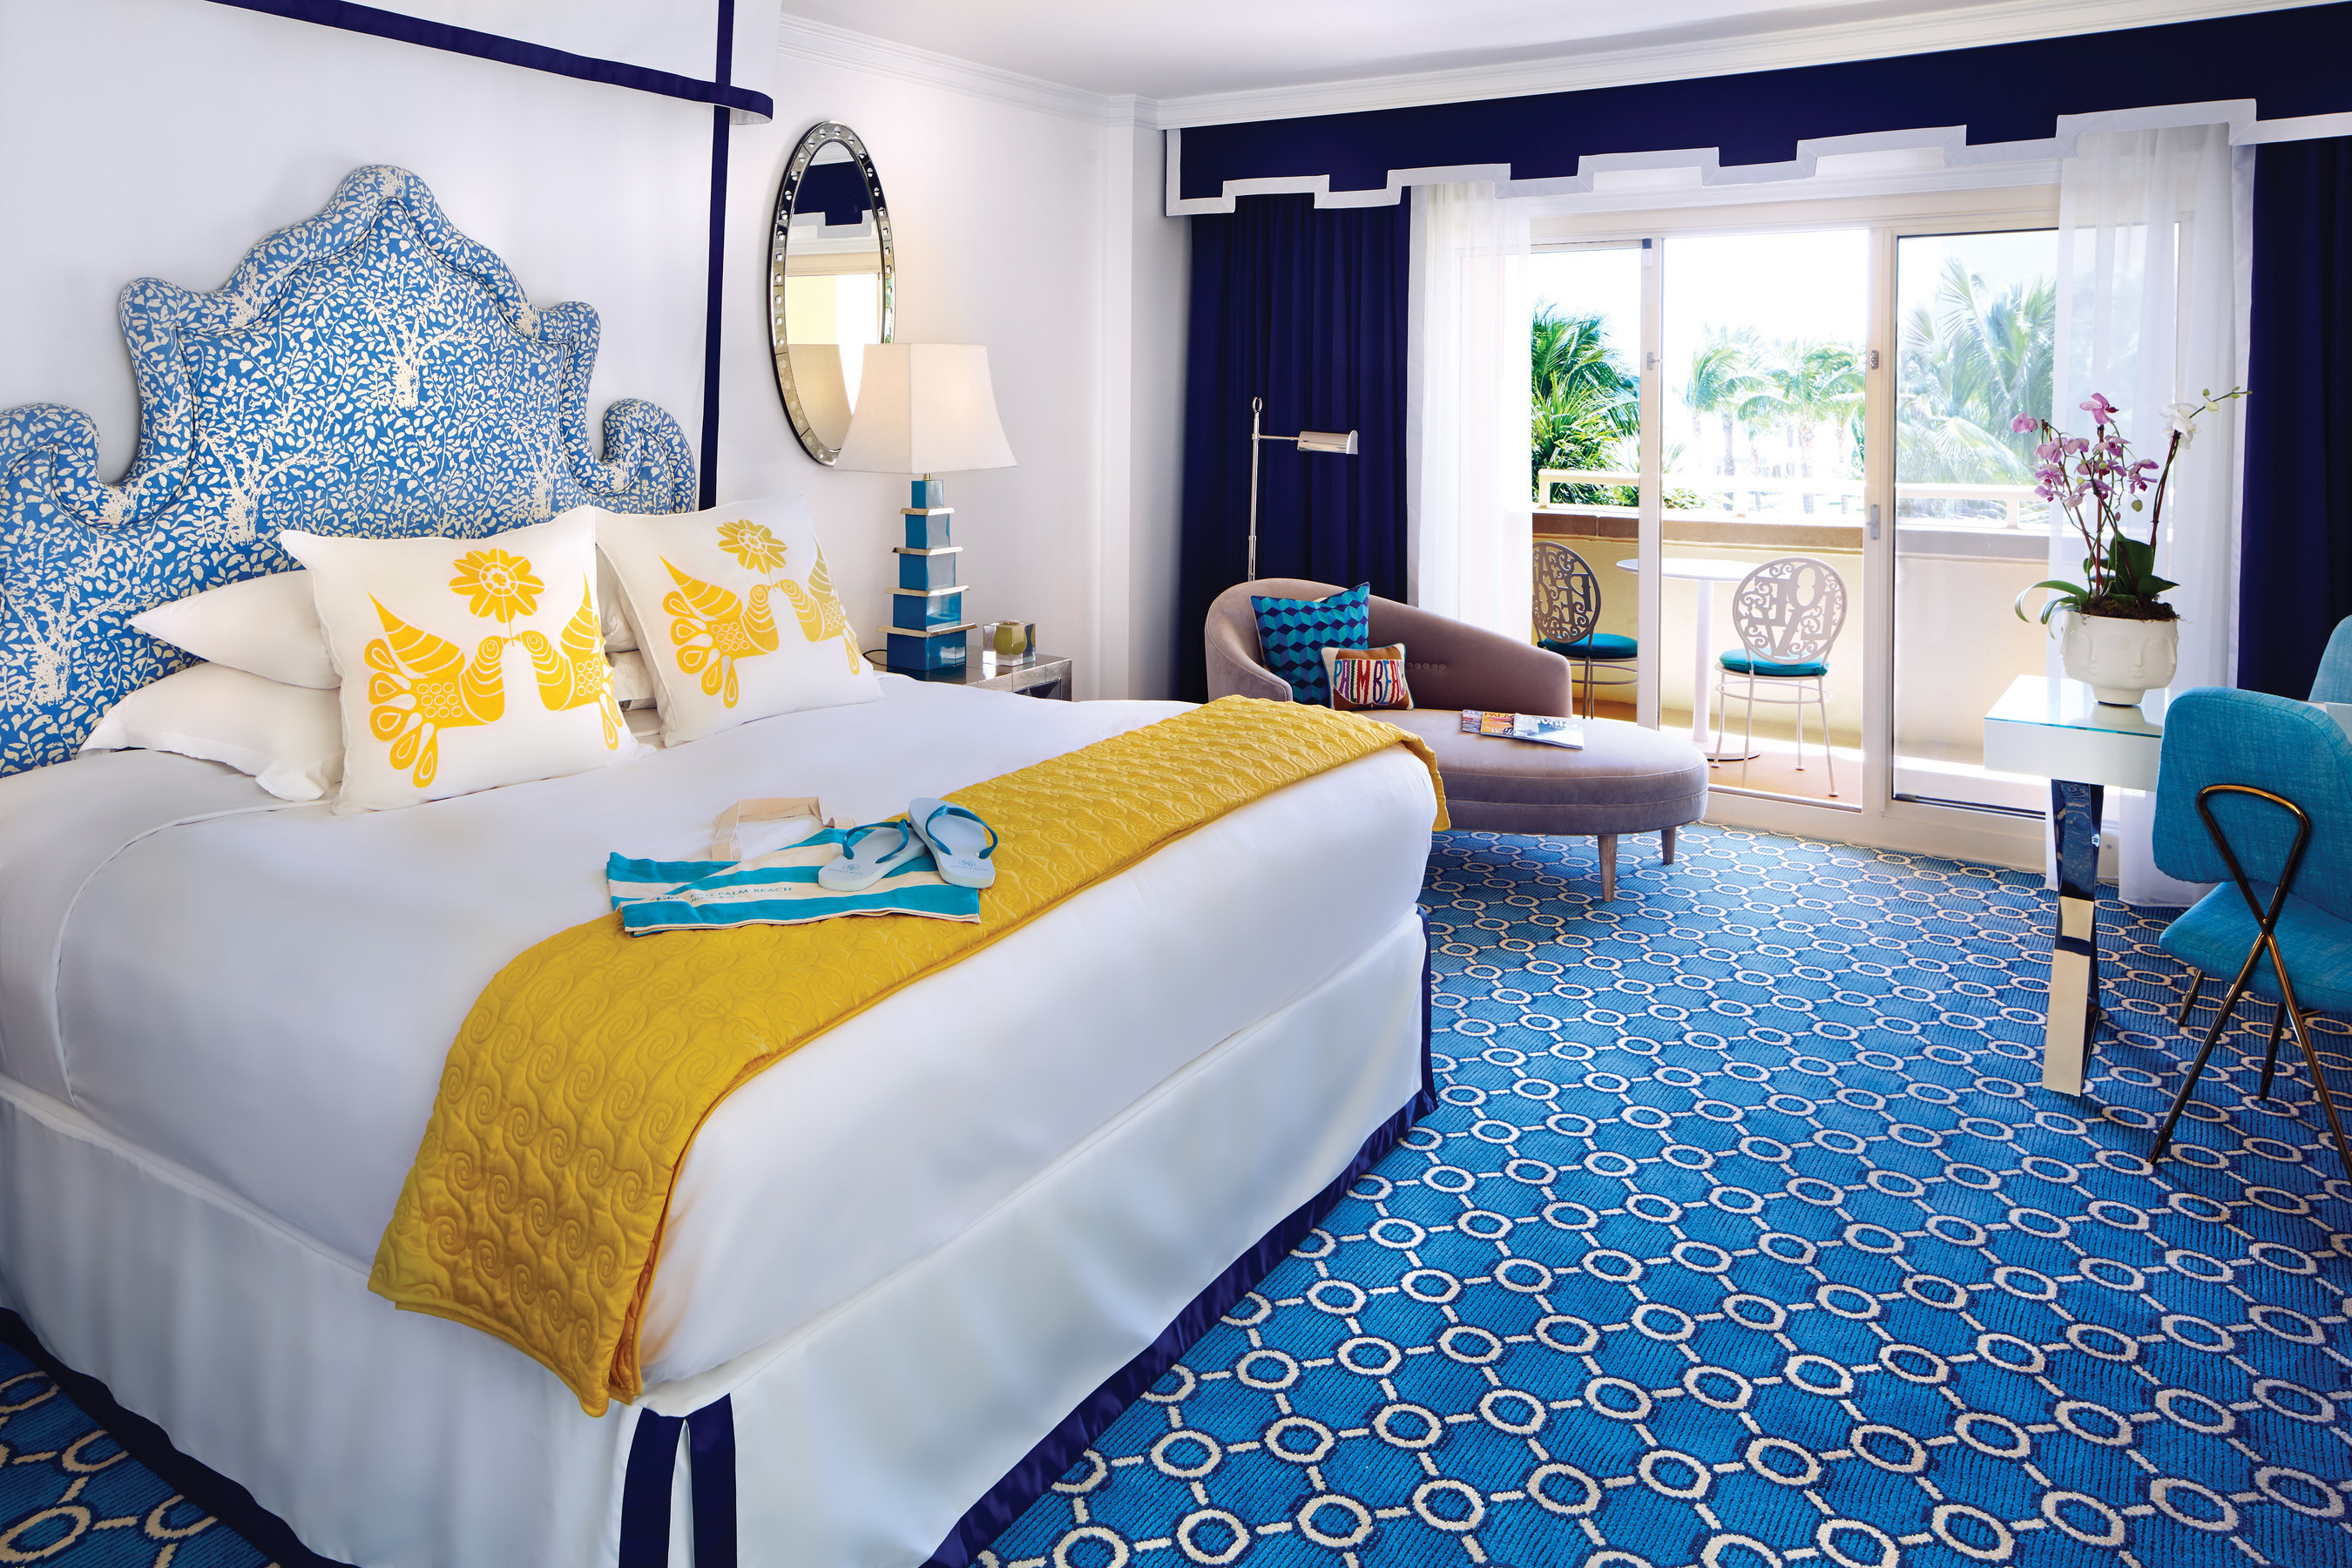 The newly re-envisioned guest rooms at Eau Palm Beach Resort & Spa feature fresh designs from iconic potter, designer and author Jonathan Adler